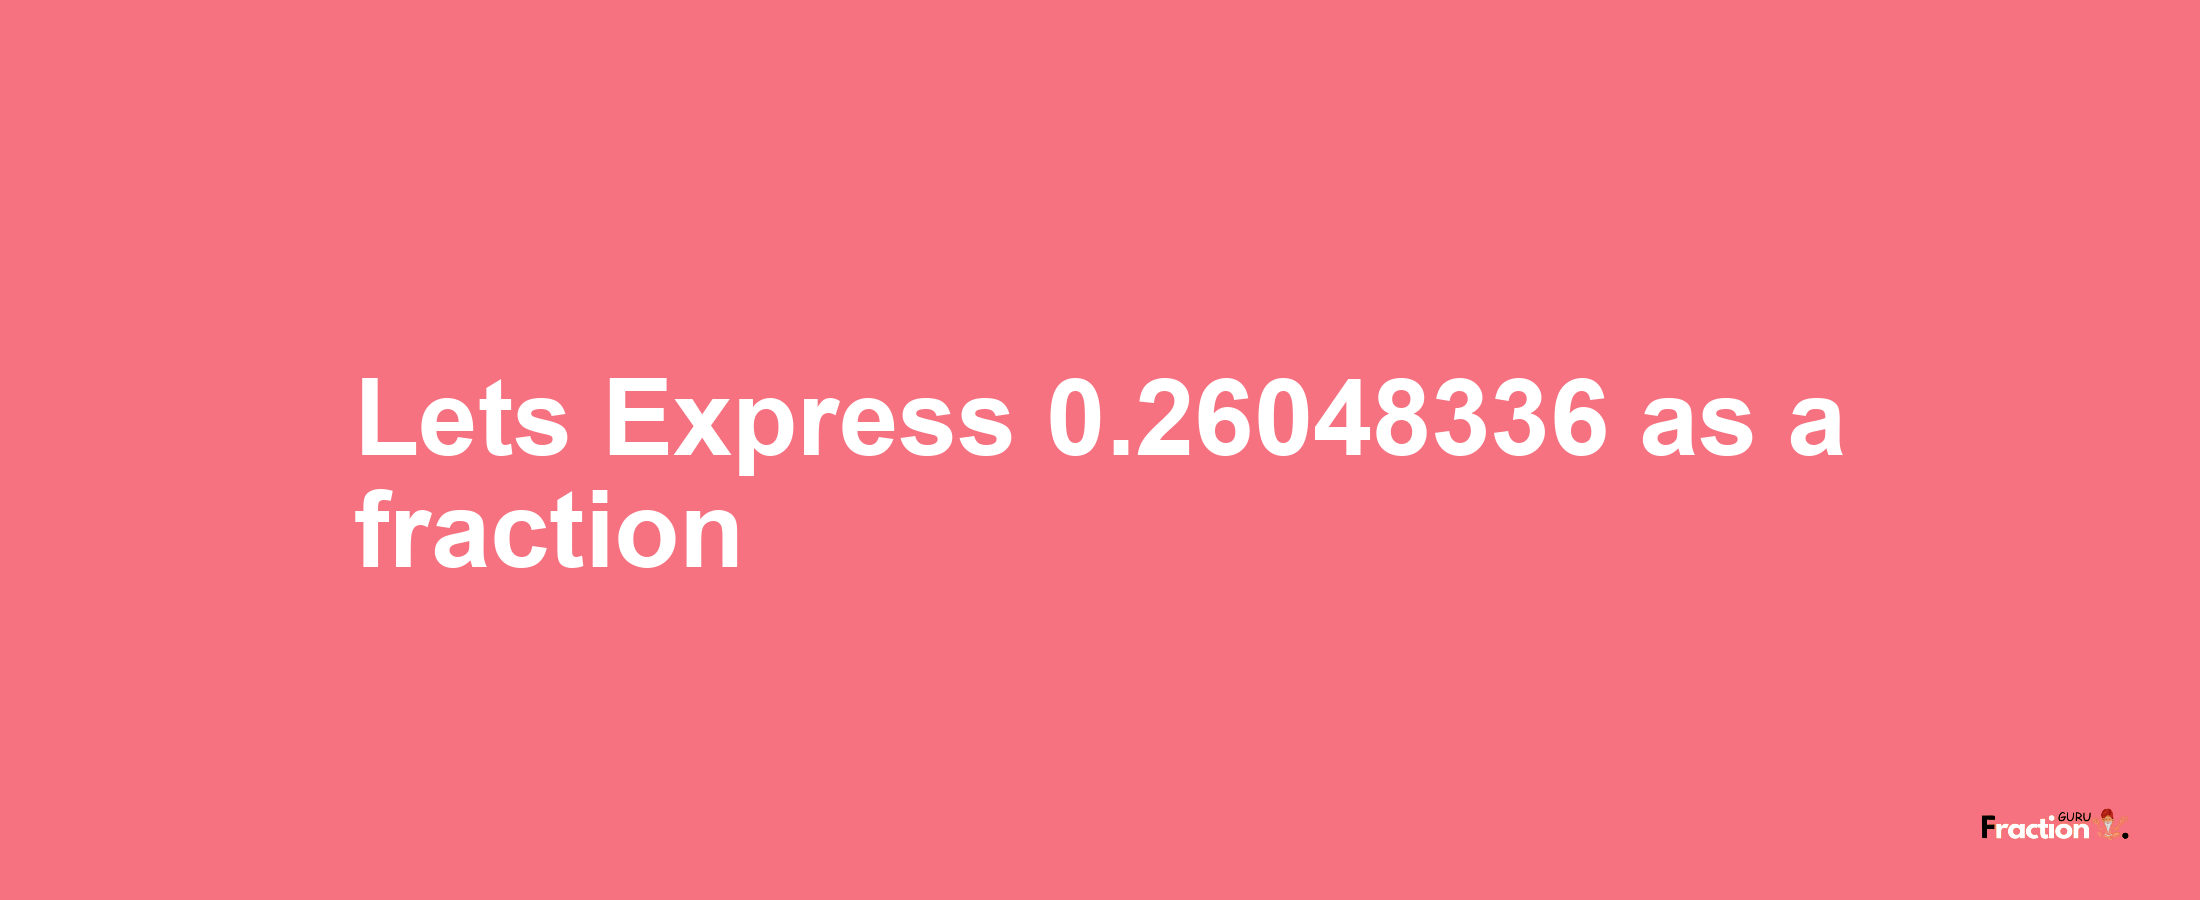 Lets Express 0.26048336 as afraction